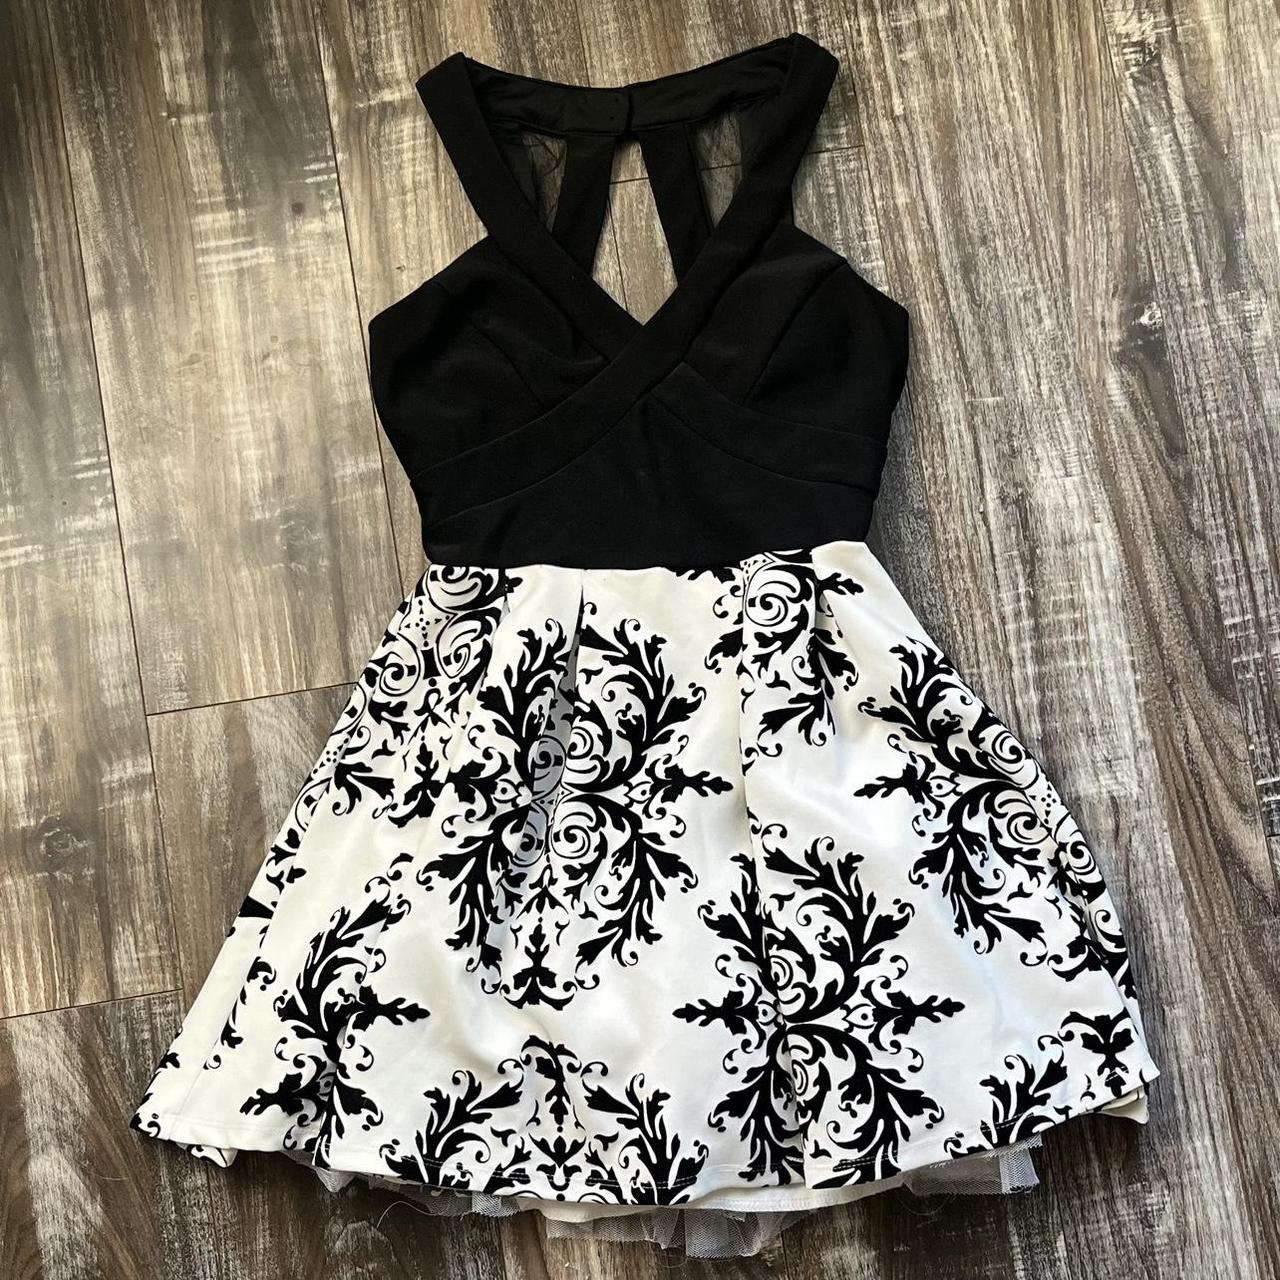 Crystal Doll Women's Black and White Dress (3)